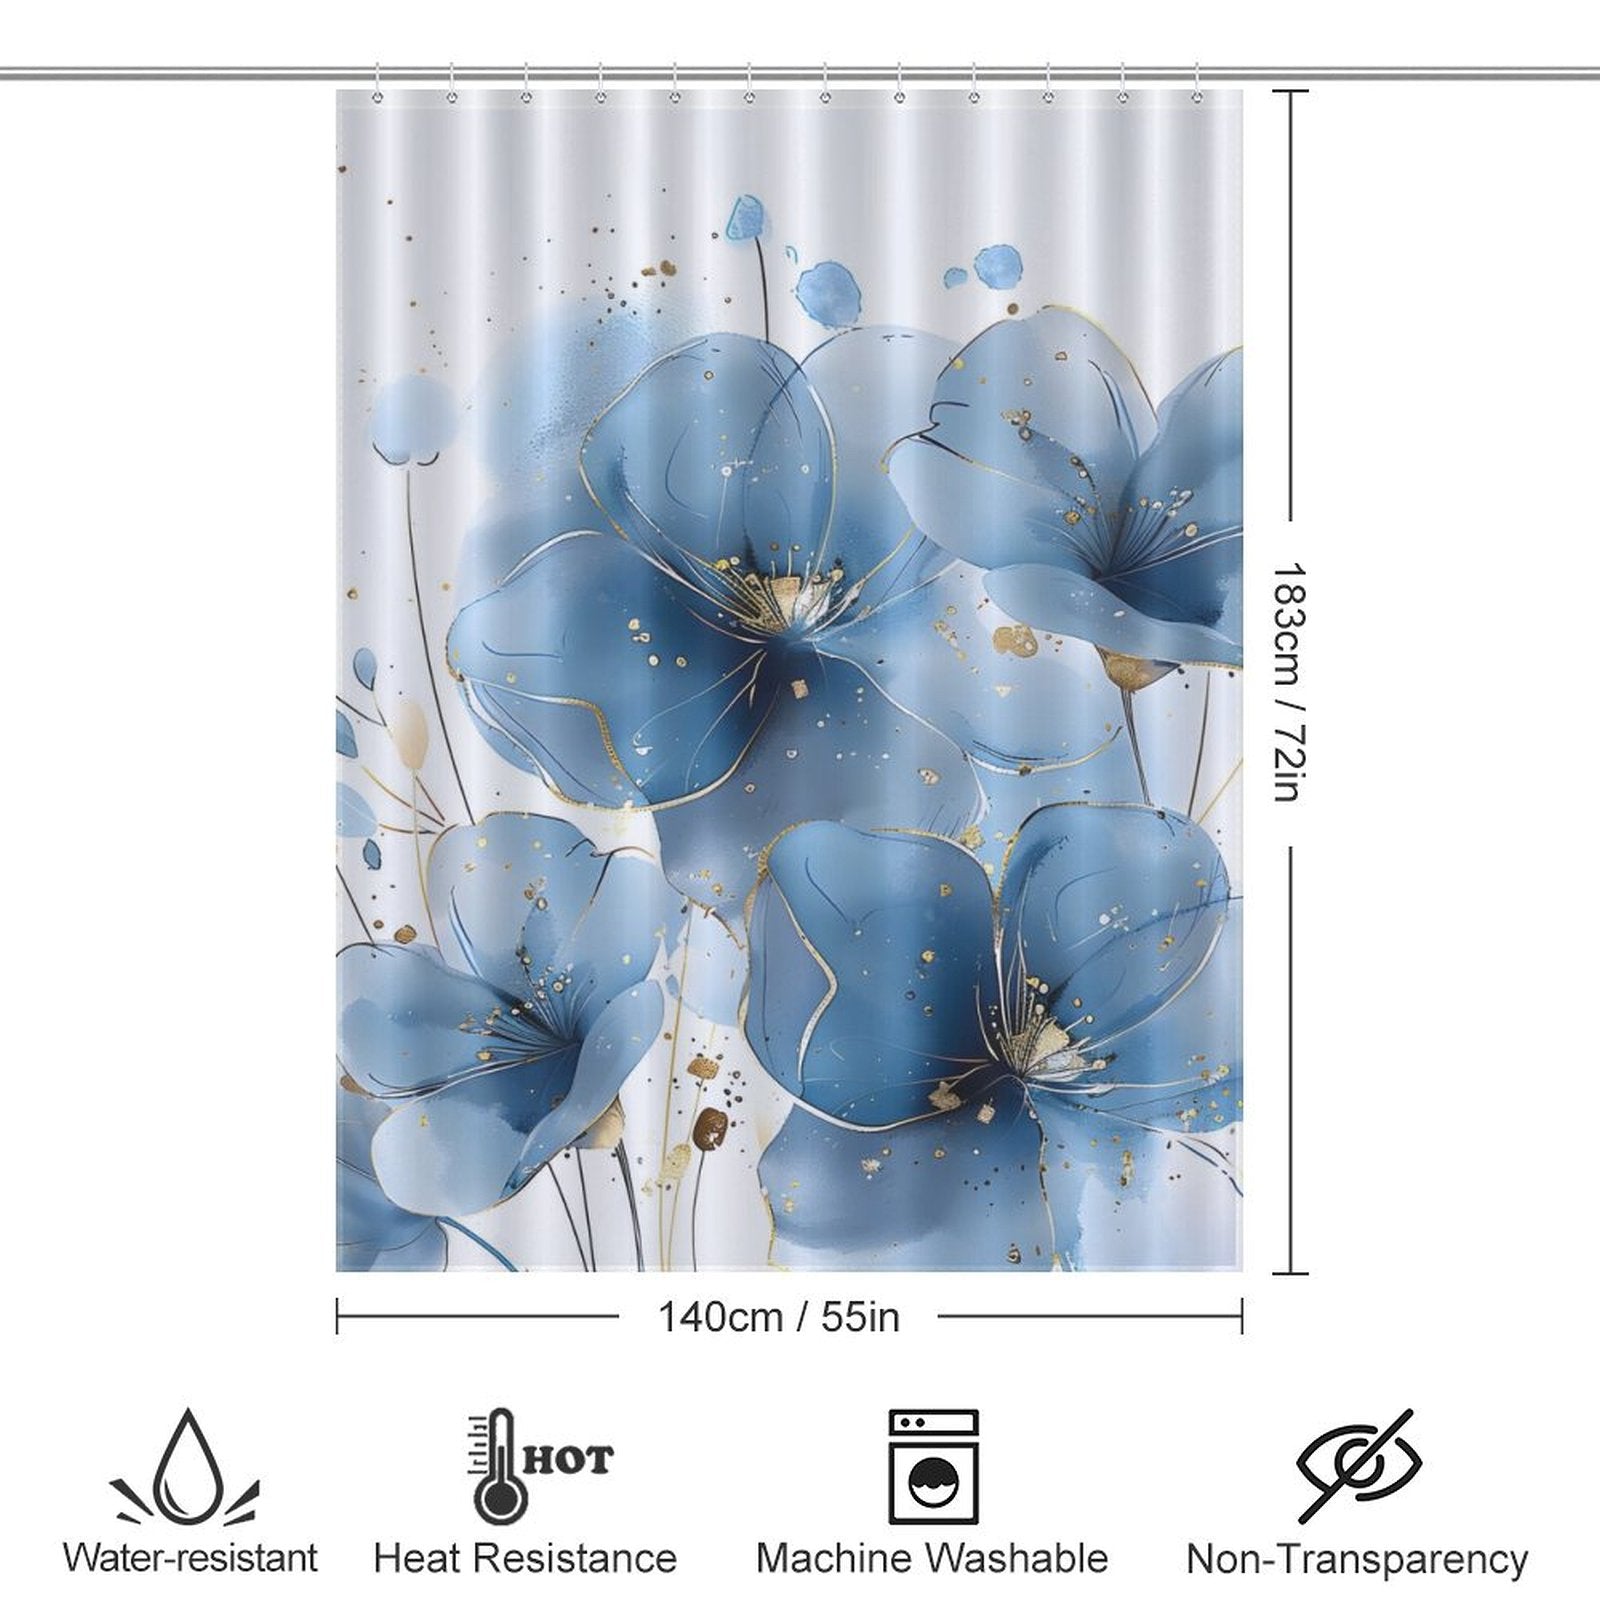 Cotton Cat Abstract Modern Art Blue Flower Minimalist Watercolor Blue Floral Shower Curtain-Cottoncat with a minimalist watercolor blue floral design, dimensions 183 cm by 140 cm. Features include water-resistance, heat resistance, machine washability, and non-transparency.